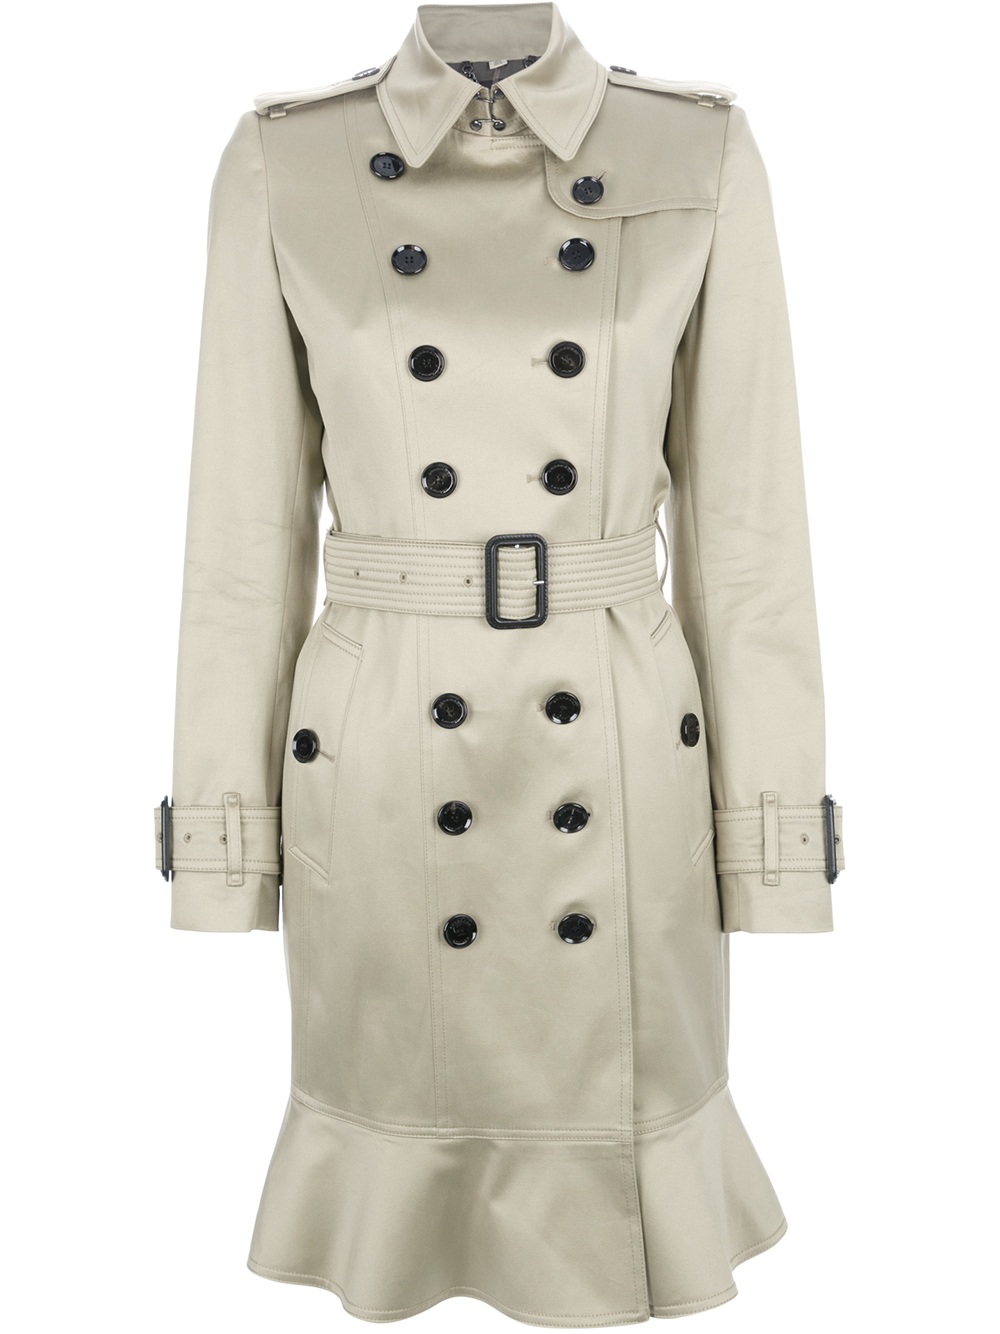 Burberry Brit Frill Hem Trench Coat in Natural | Lyst